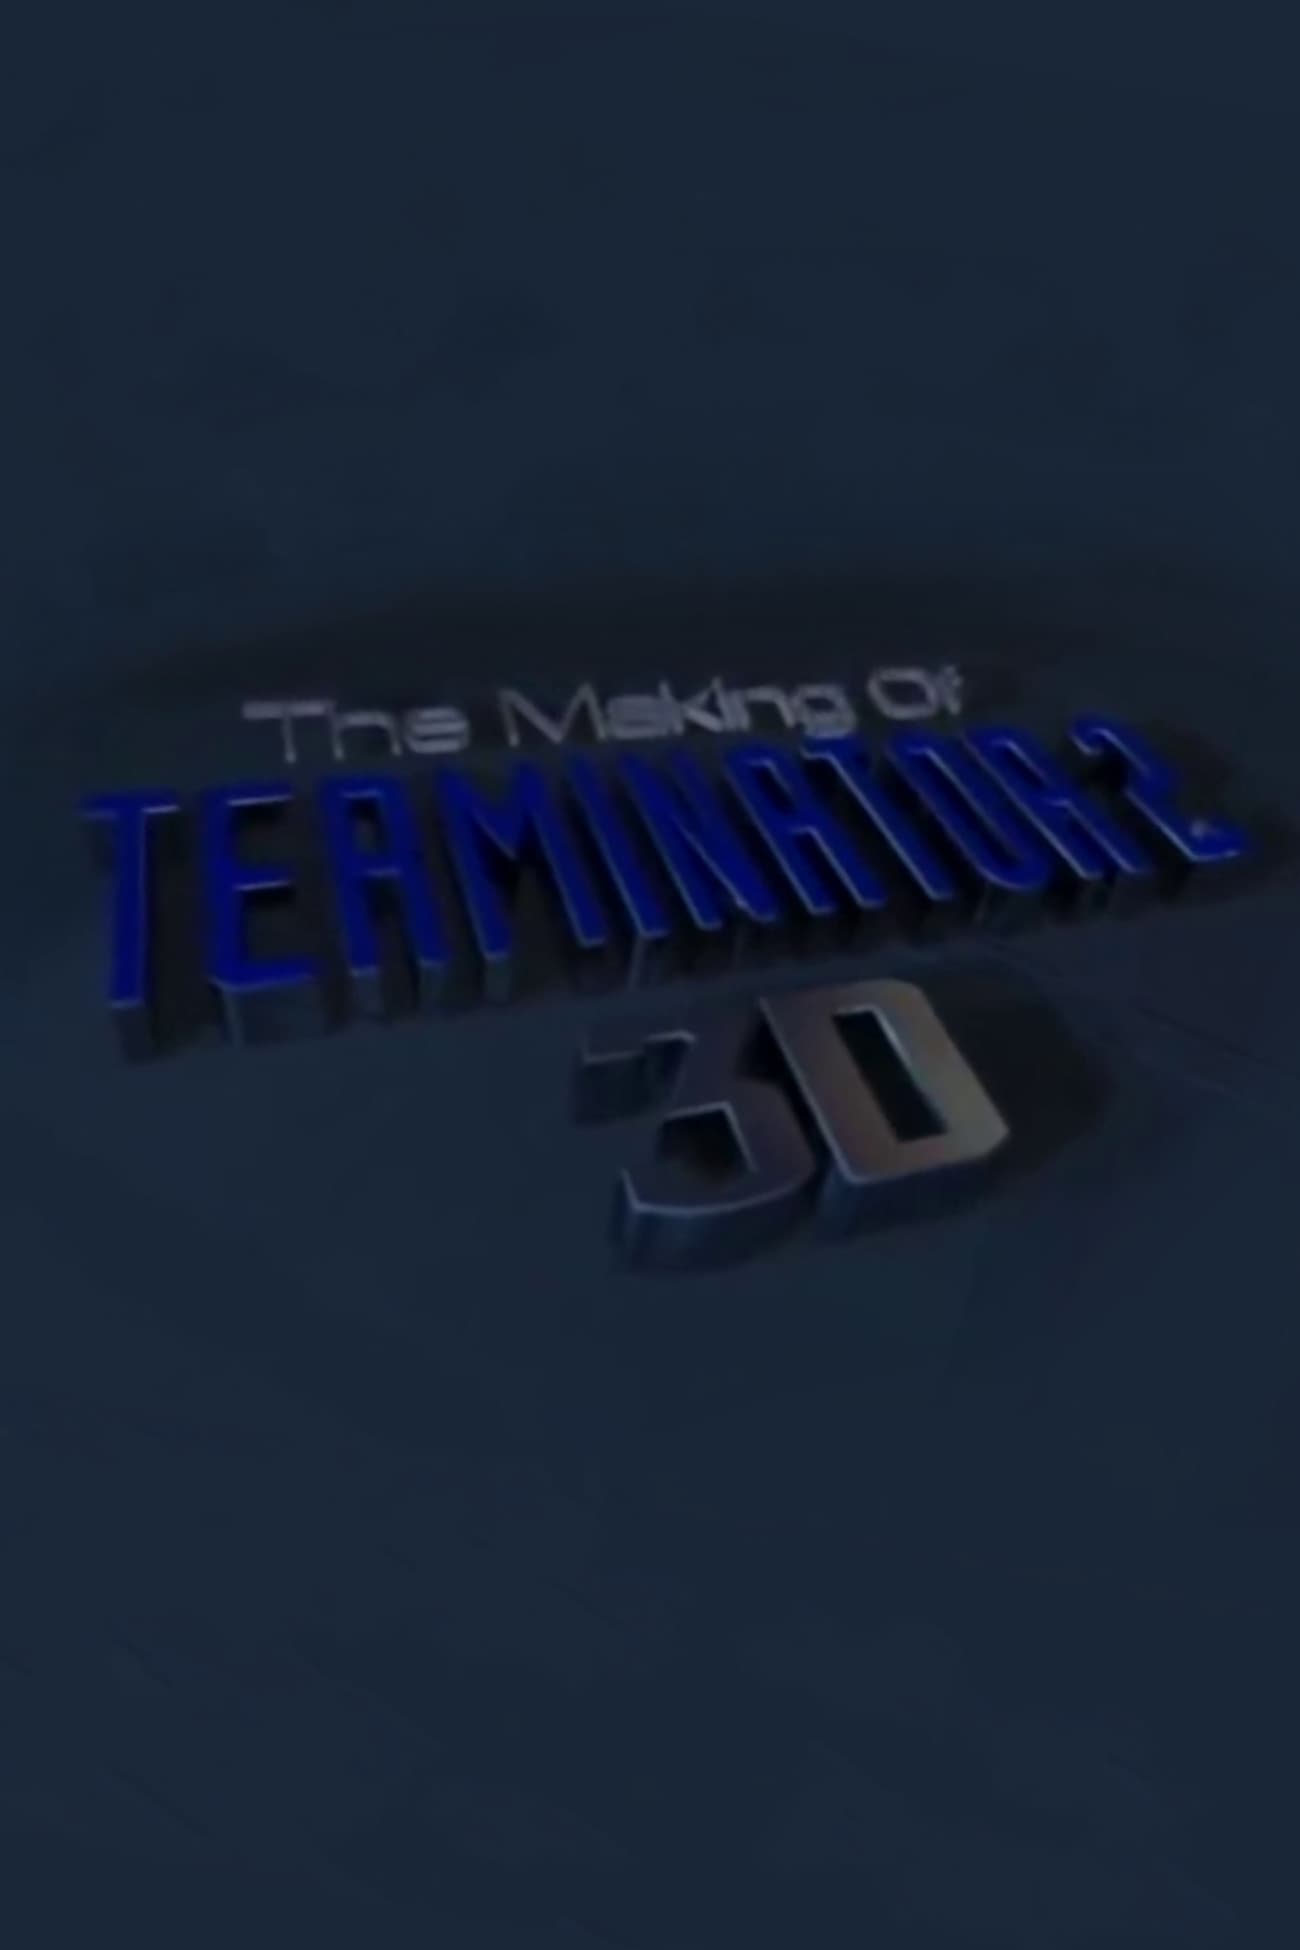 The Making of 'Terminator 2 3D'